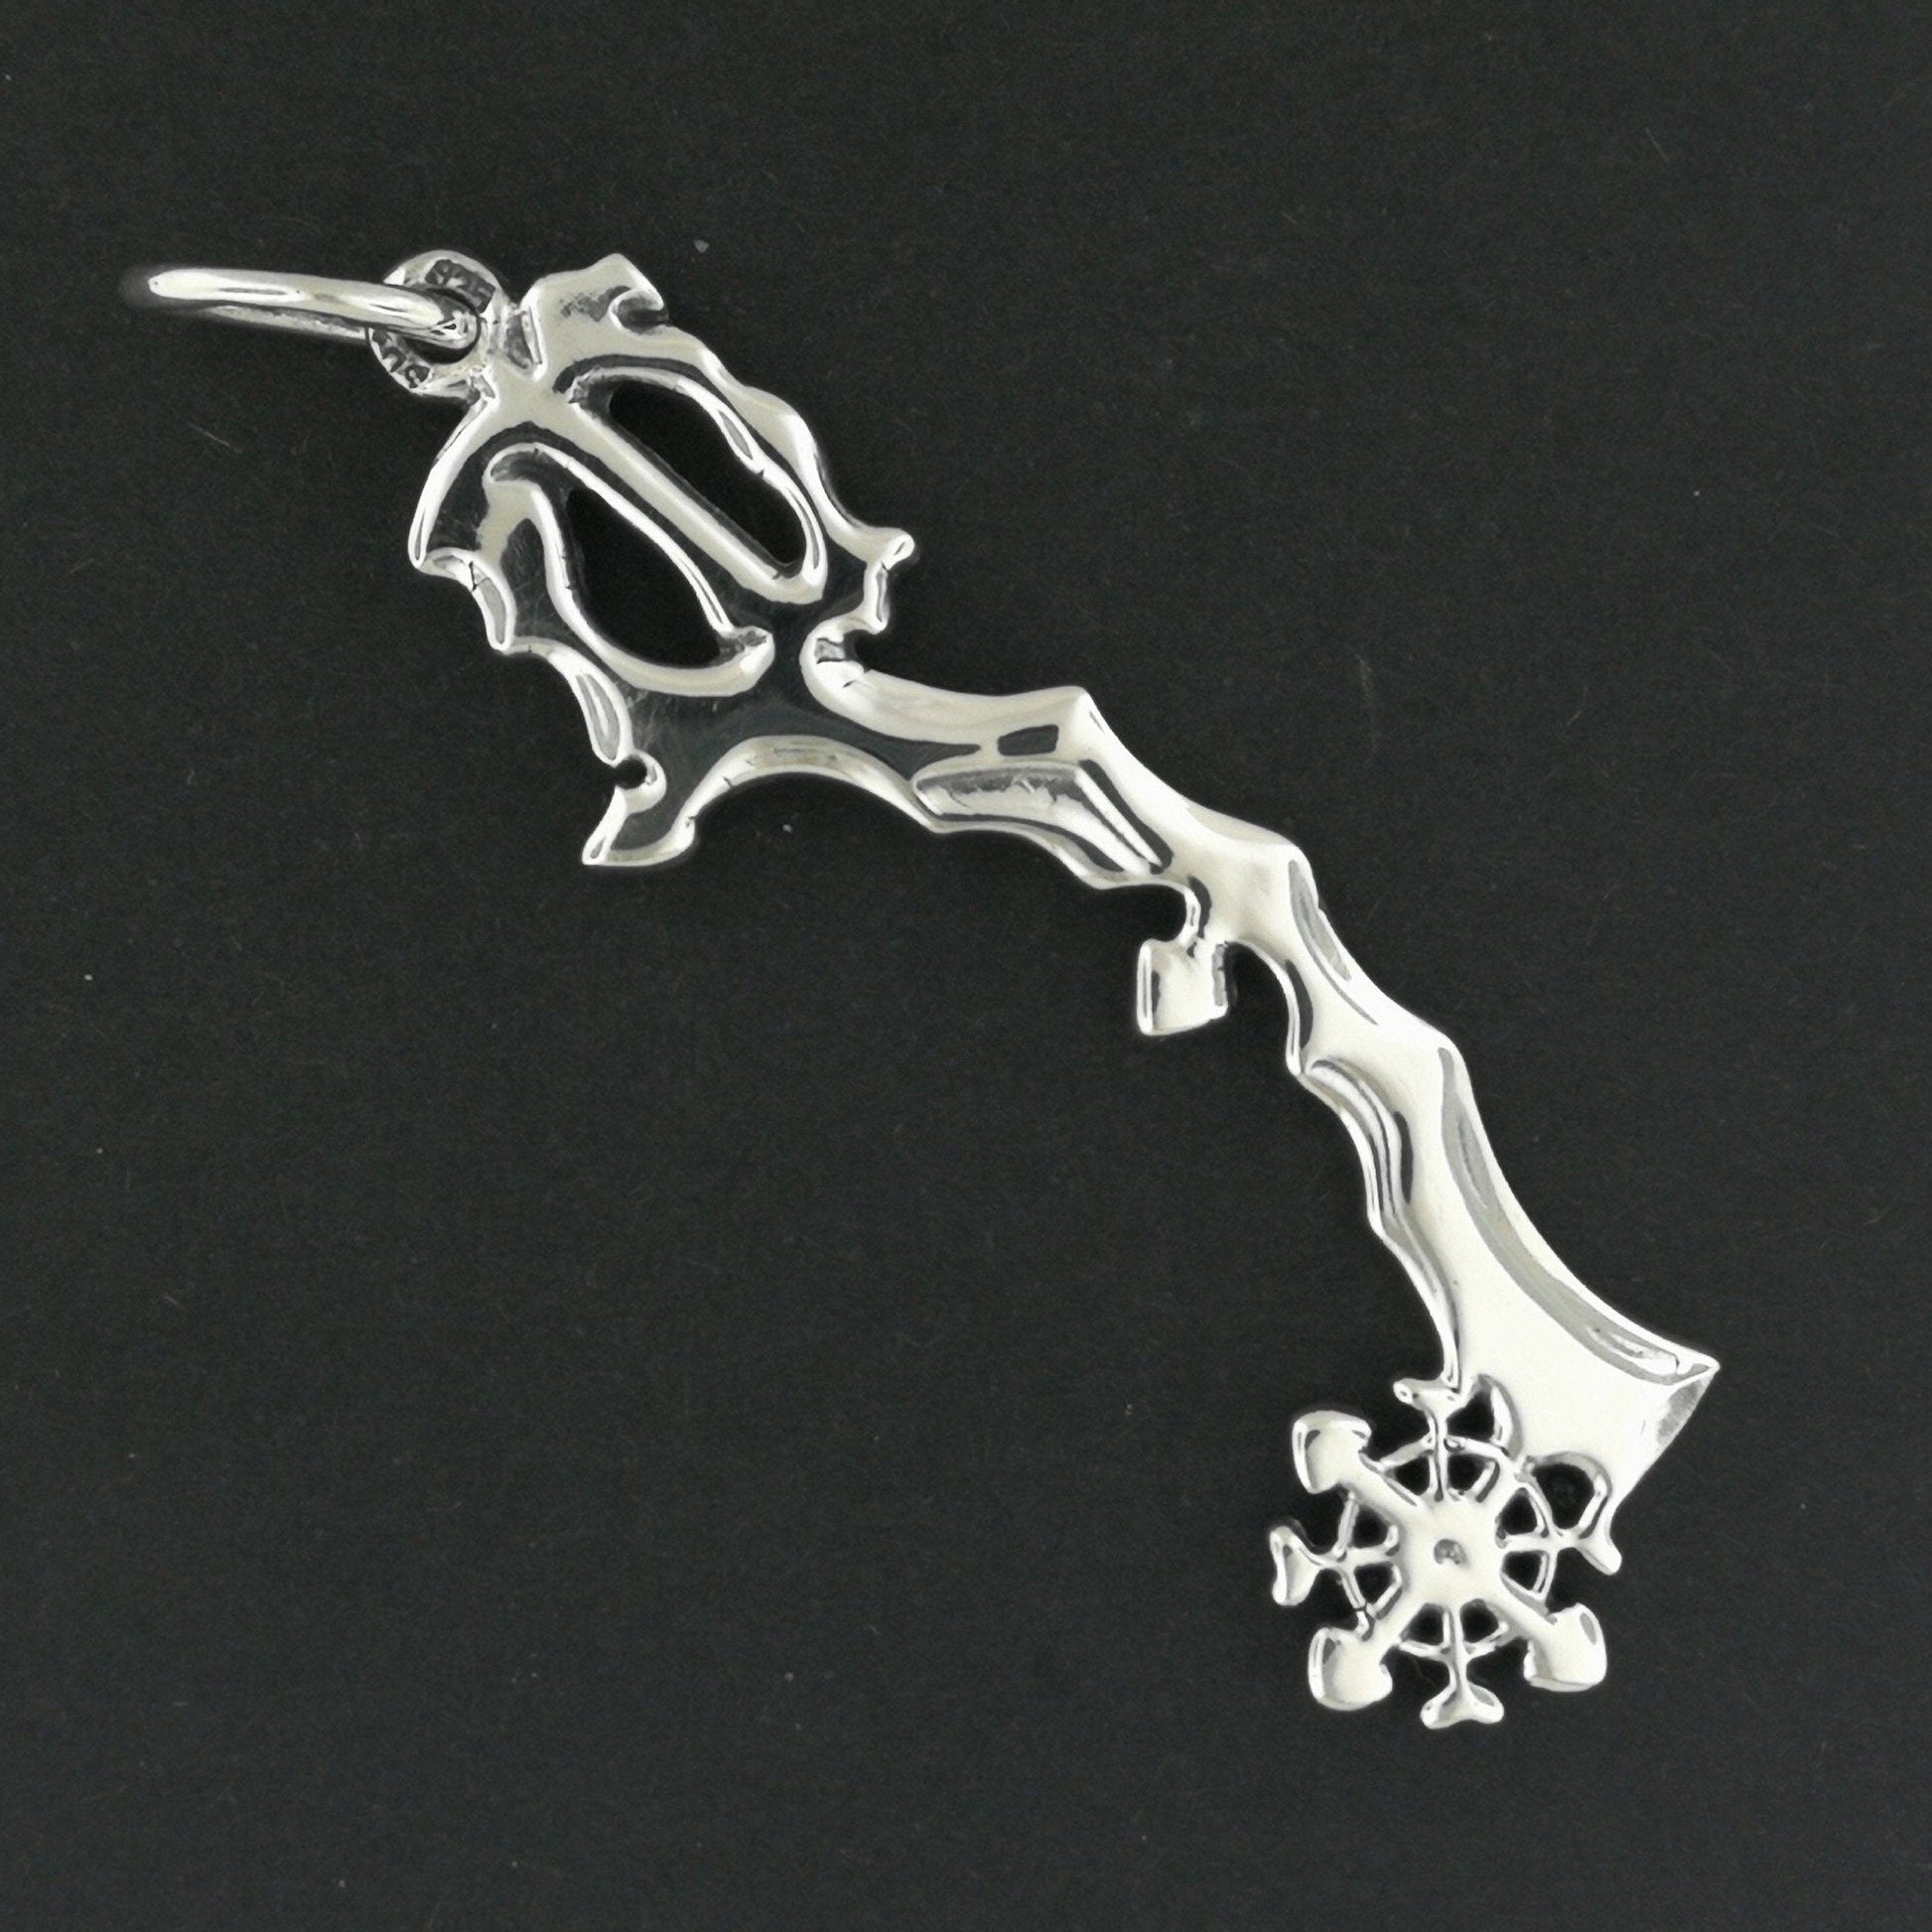 Kingdom Hearts Diamond Dust Keyblade Pendant in Sterling Silver or Antique Bronze, Video Game Jewelry, Video Game Jewellery, Silver Video Game Pendant, Bronze Video Game Pendant, Gamer Girl Pendant, Gamer Girl Jewelry, Gamer Girl Jewellry, Gamer Geek Pendant, Gamer Geek Jewelry, KH Keyblade Pendant, Silver Keyblade Pendant, Bronze Keyblade Pendant, Diamond Dust Pendant, 925 Silver Keyblade, Kingdom Hearts Keyblade Pendant